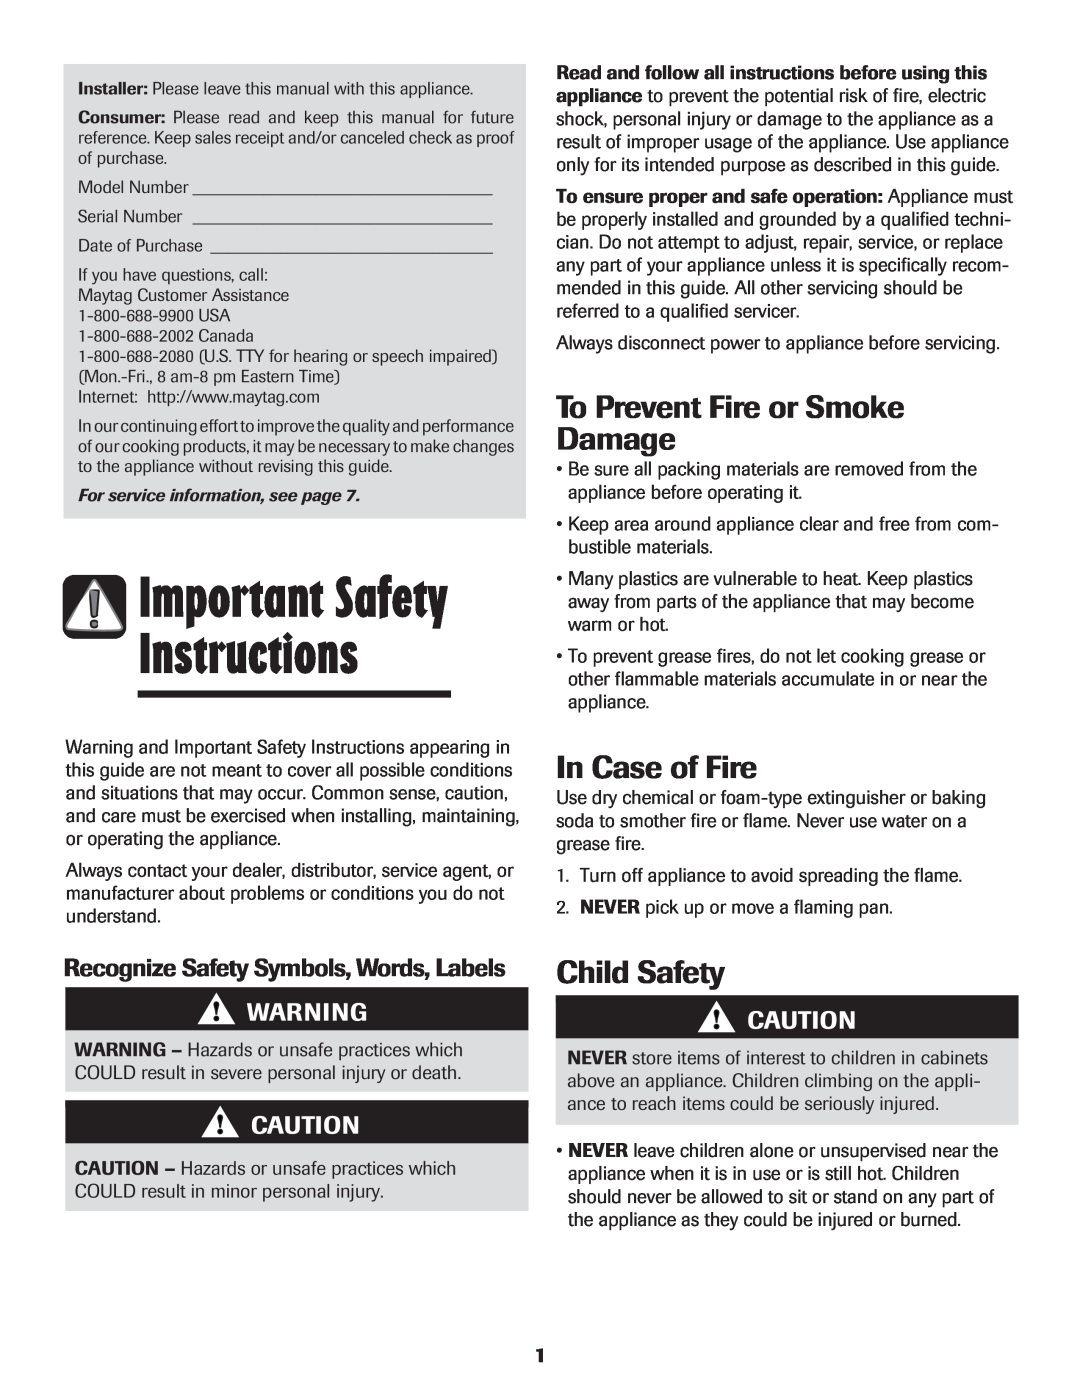 Maytag MEC4430AAW Instructions, Important Safety, To Prevent Fire or Smoke Damage, In Case of Fire, Child Safety 